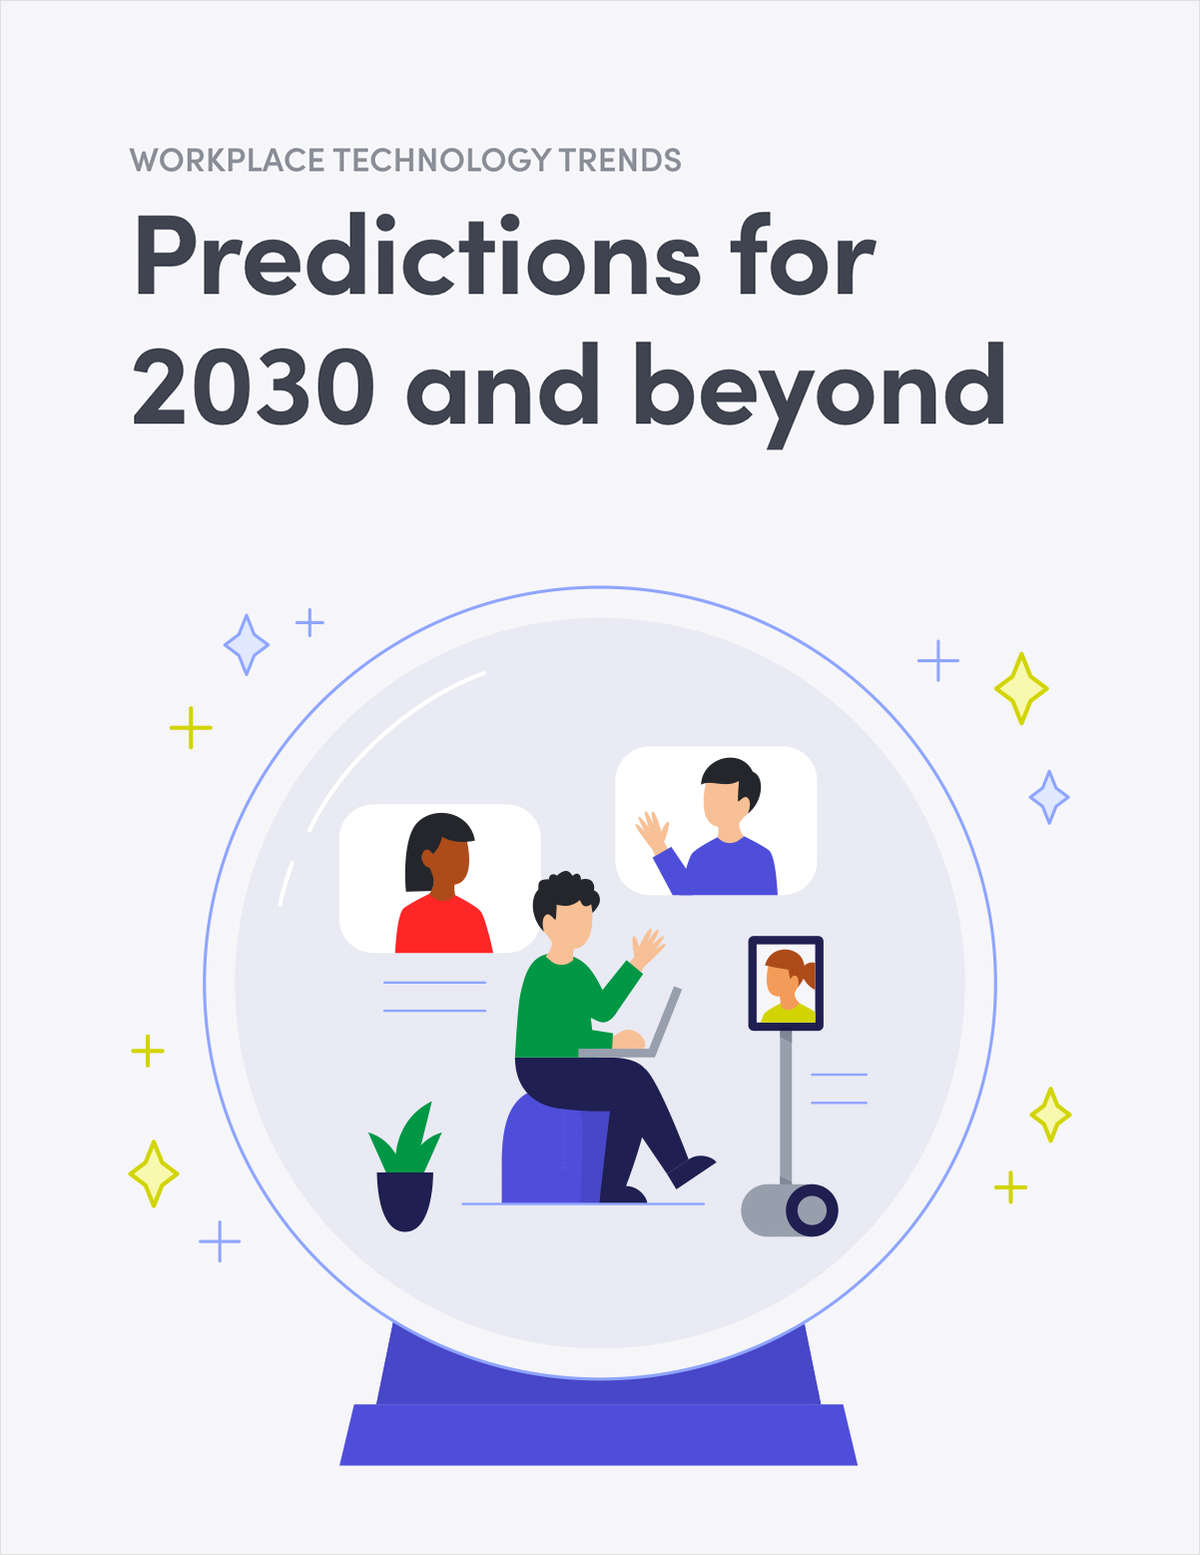 Workplace Technology Trends: Predictions for 2030 and Beyond